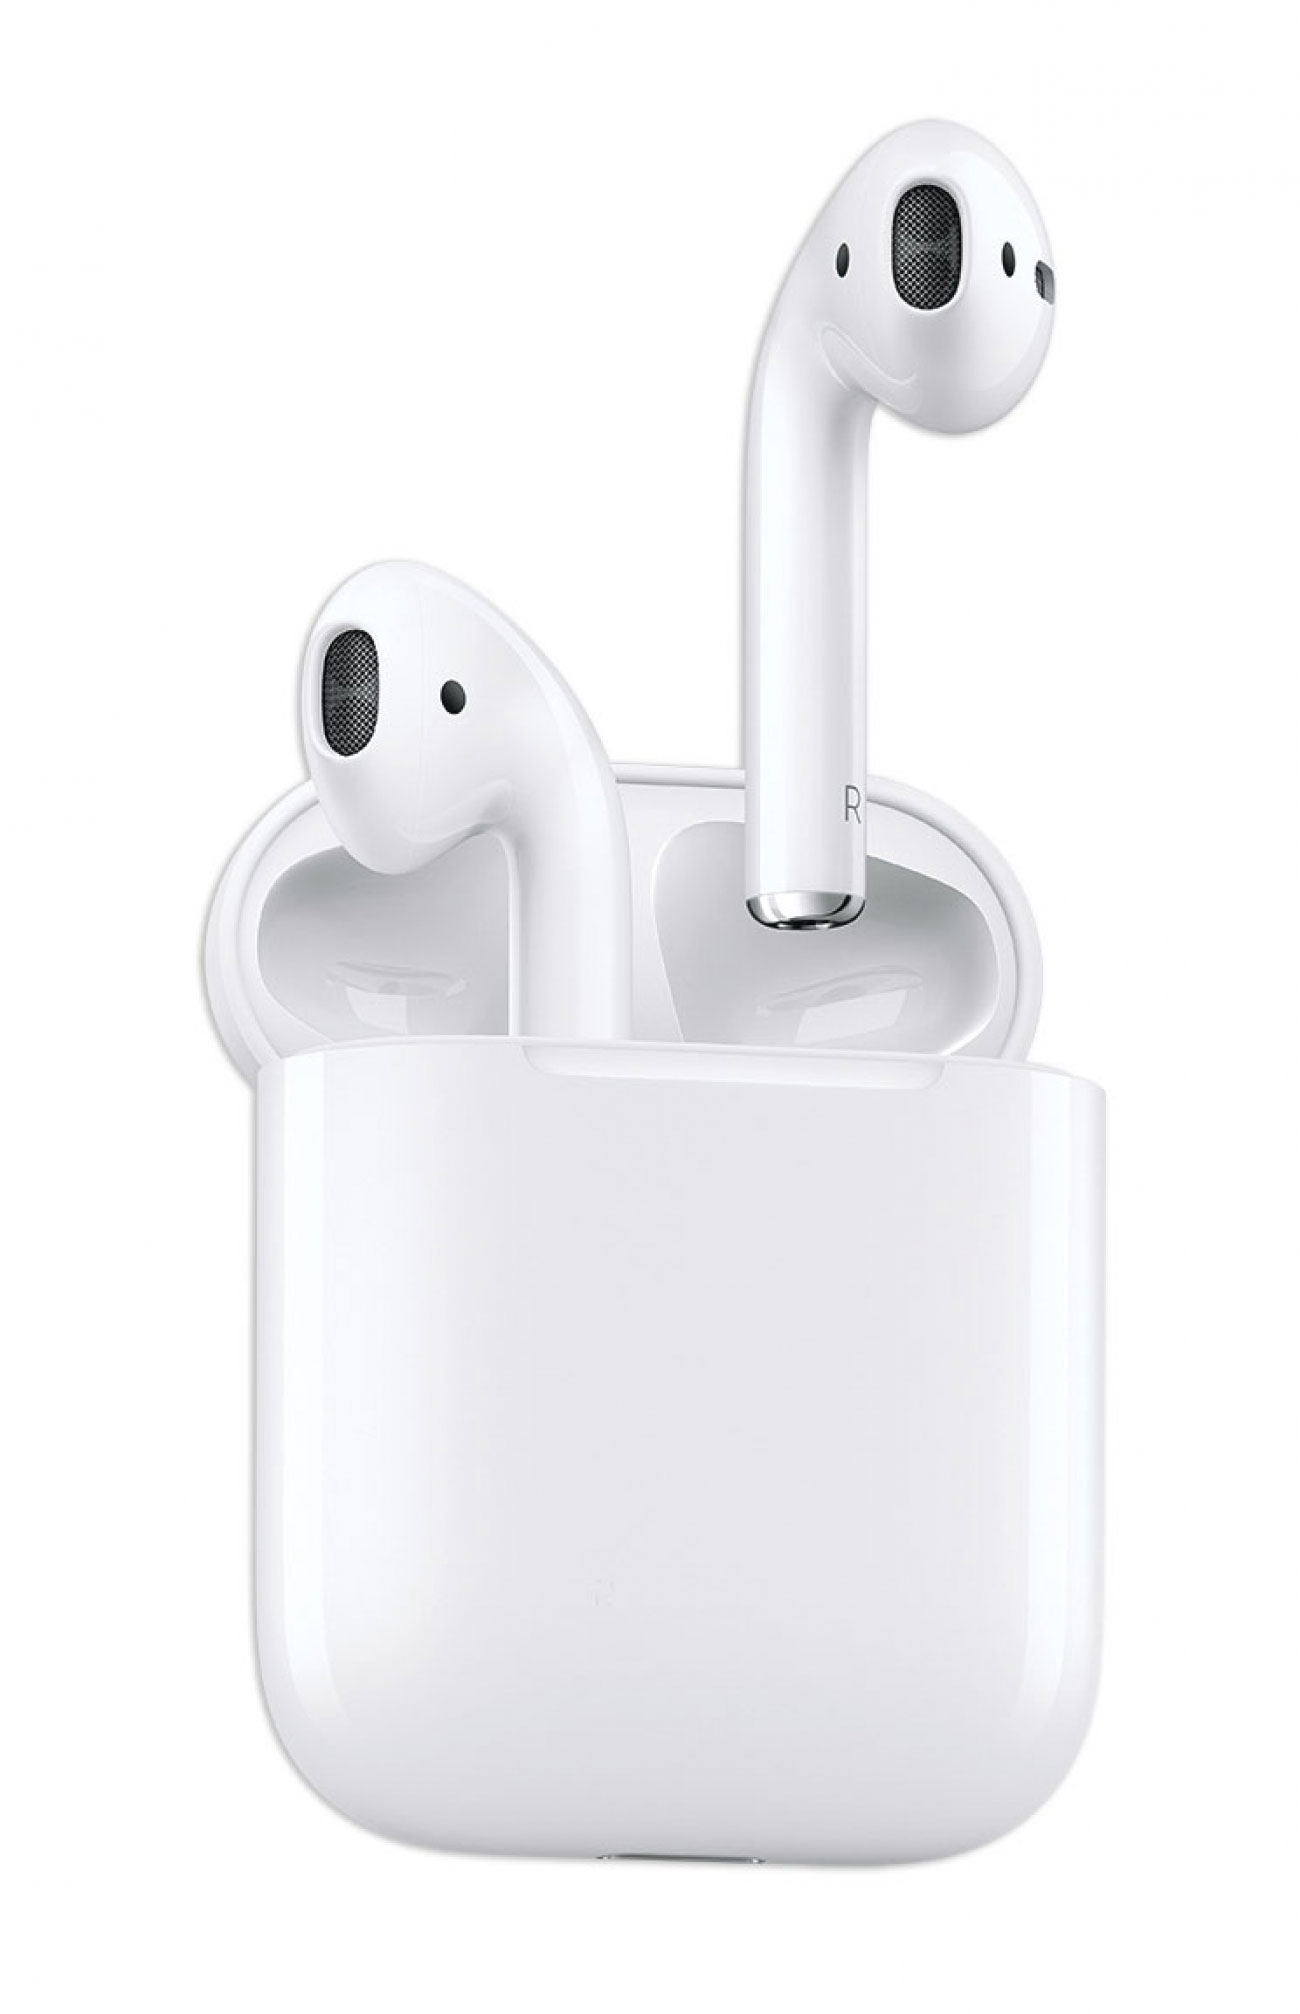 Apple AirPods Truly Wireless